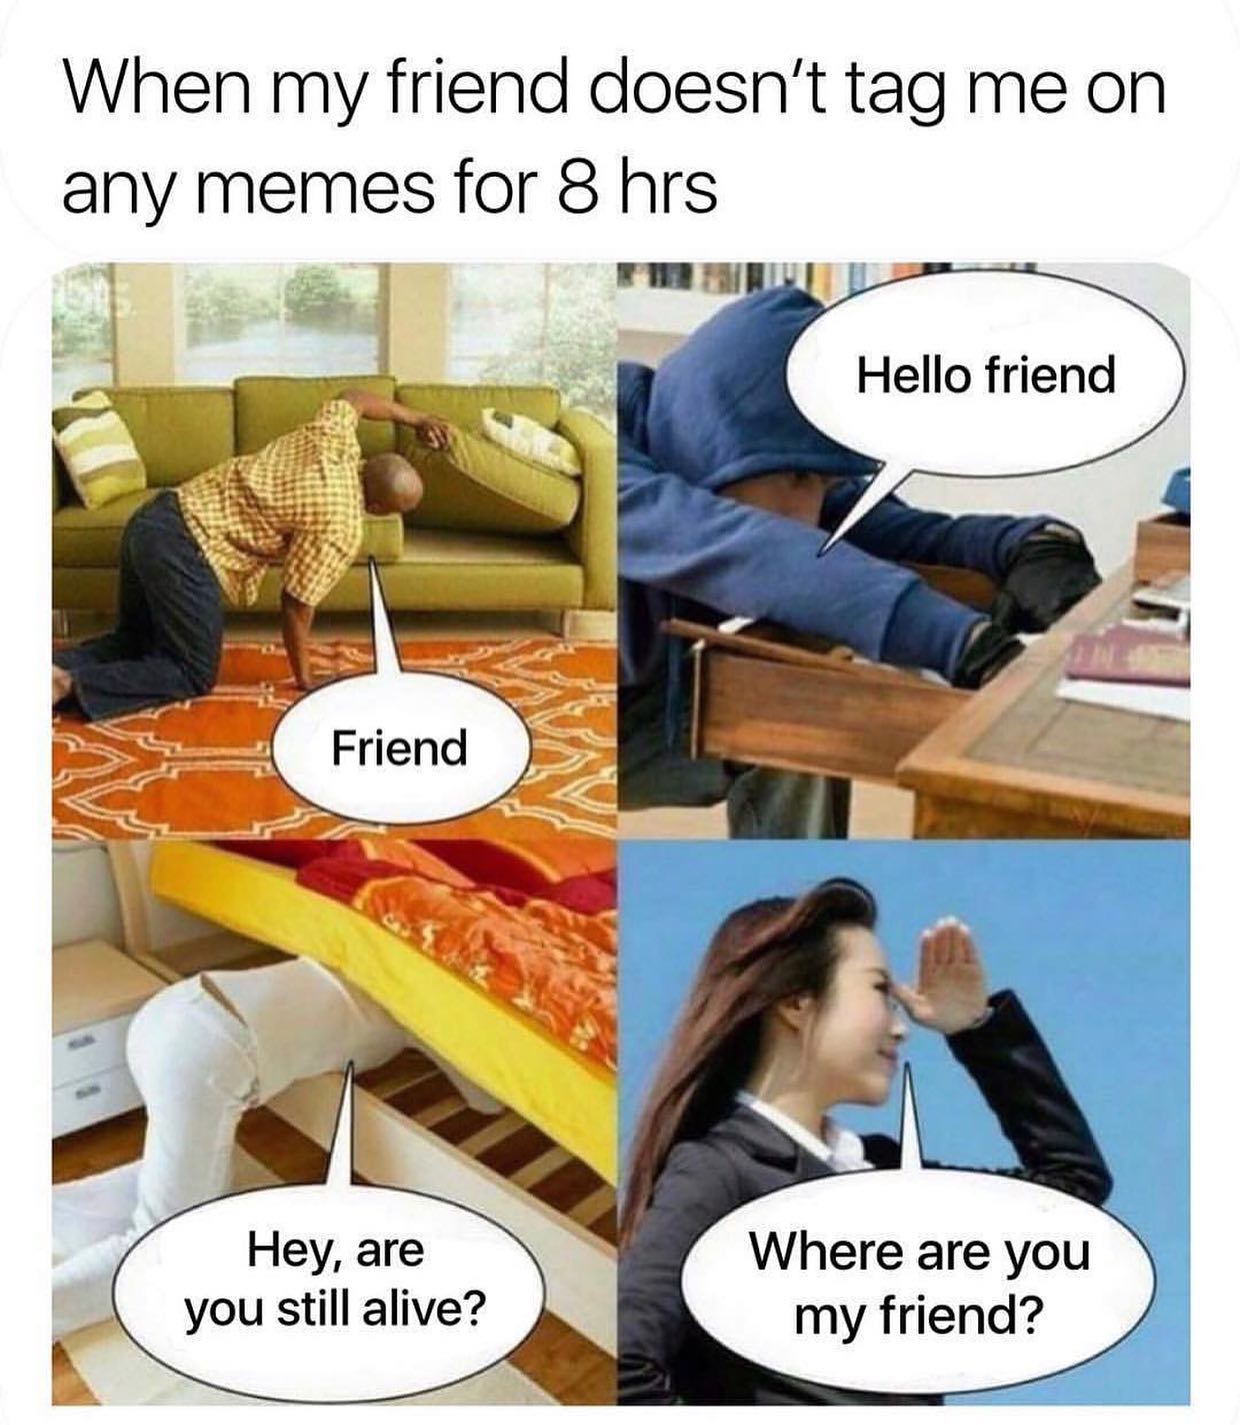 dank memes  you my friend meme - When my friend doesn't tag me on any memes for 8 hrs Hello friend Friend Where are you Hey, are you still alive? my friend?